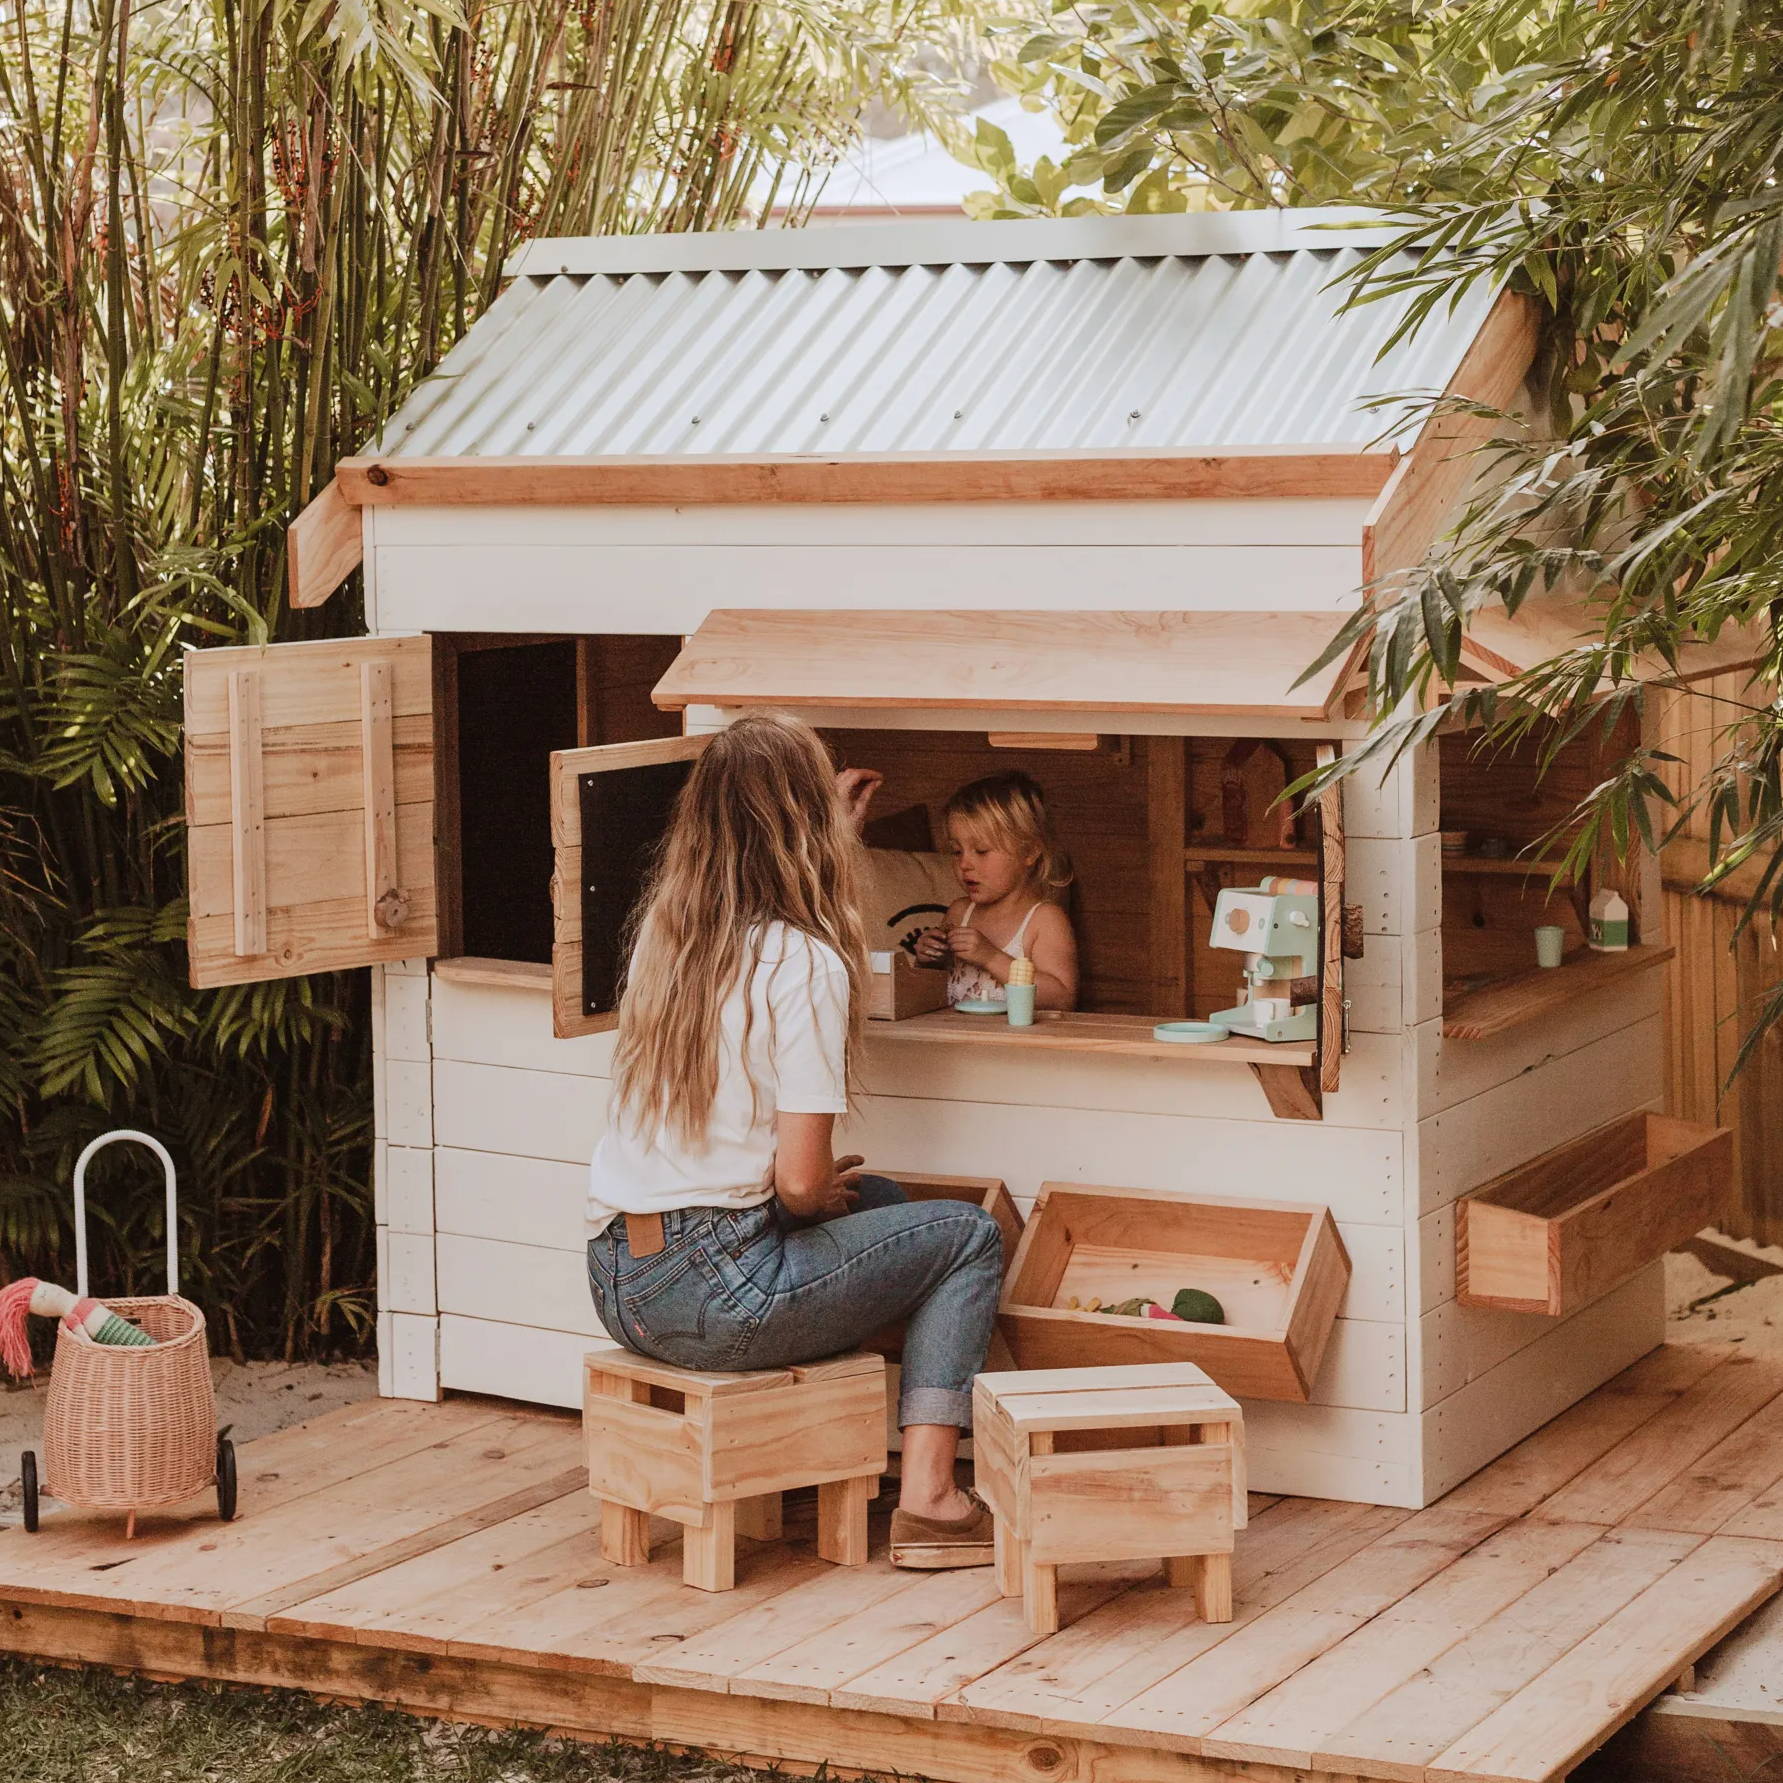 A pithced roof style cubby house with a mom and a kid